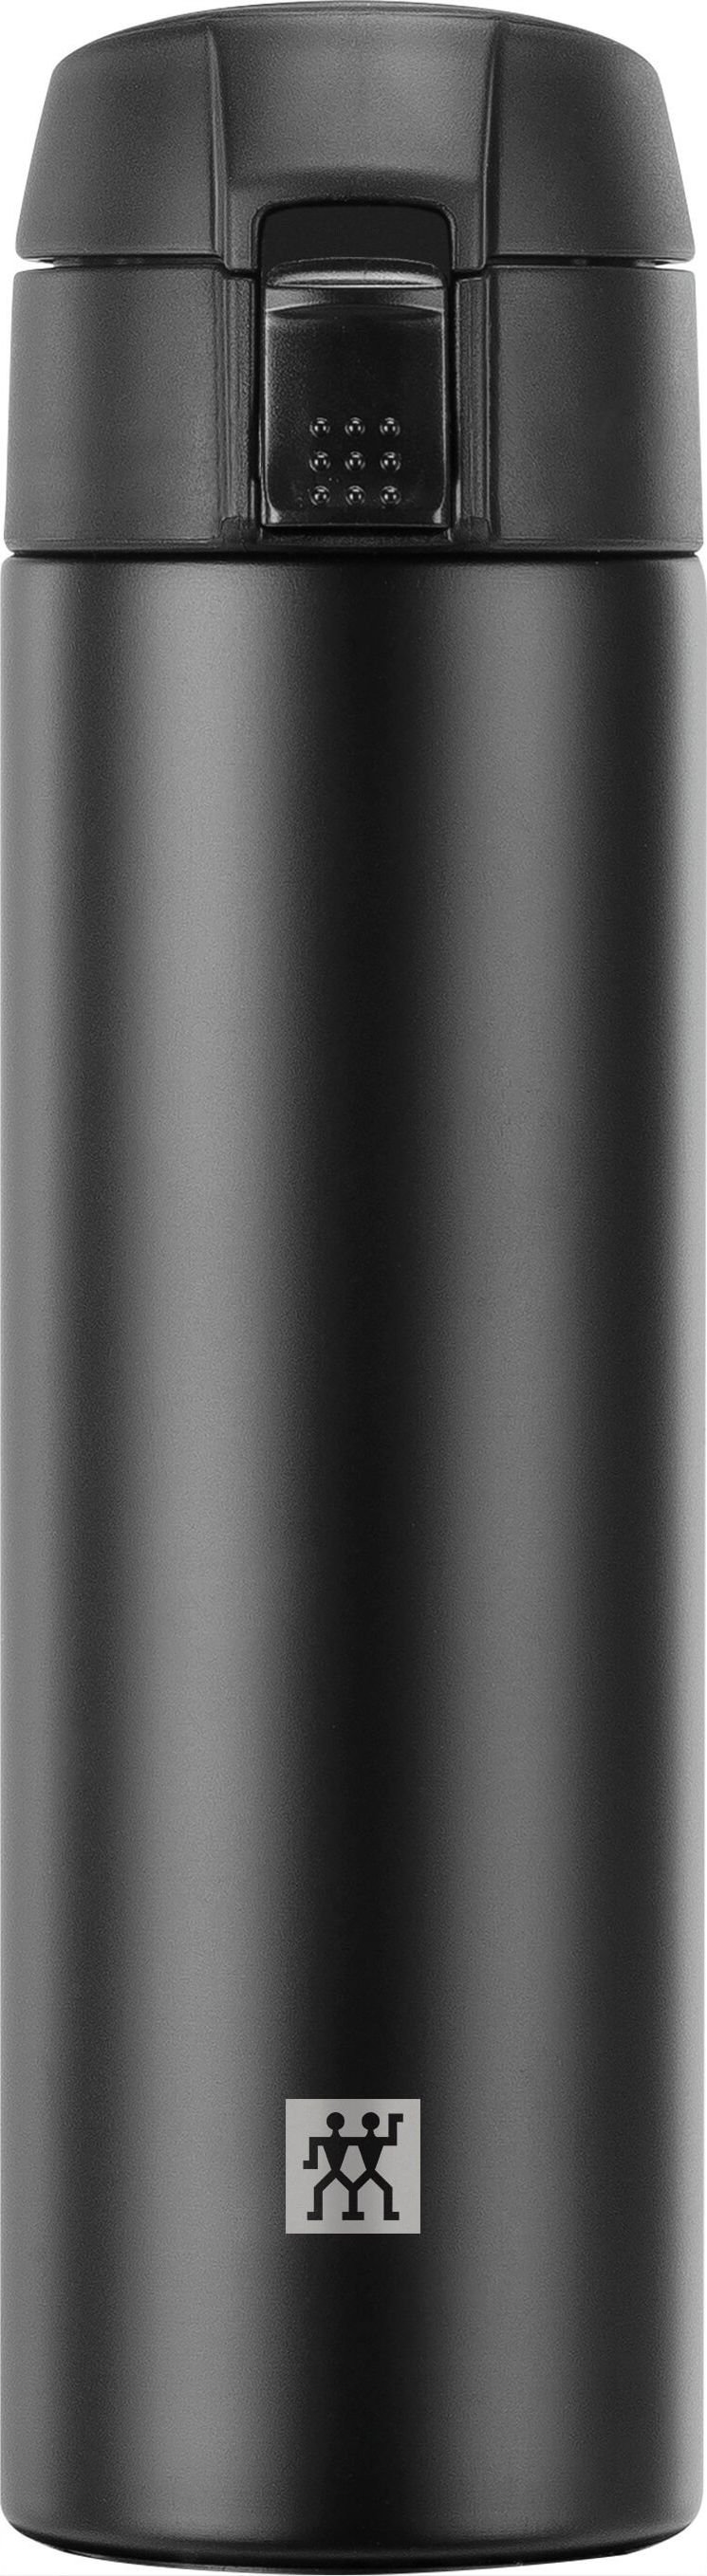 THERMAL CUP ZWILLING THERMO 450 ML BLACK termoss